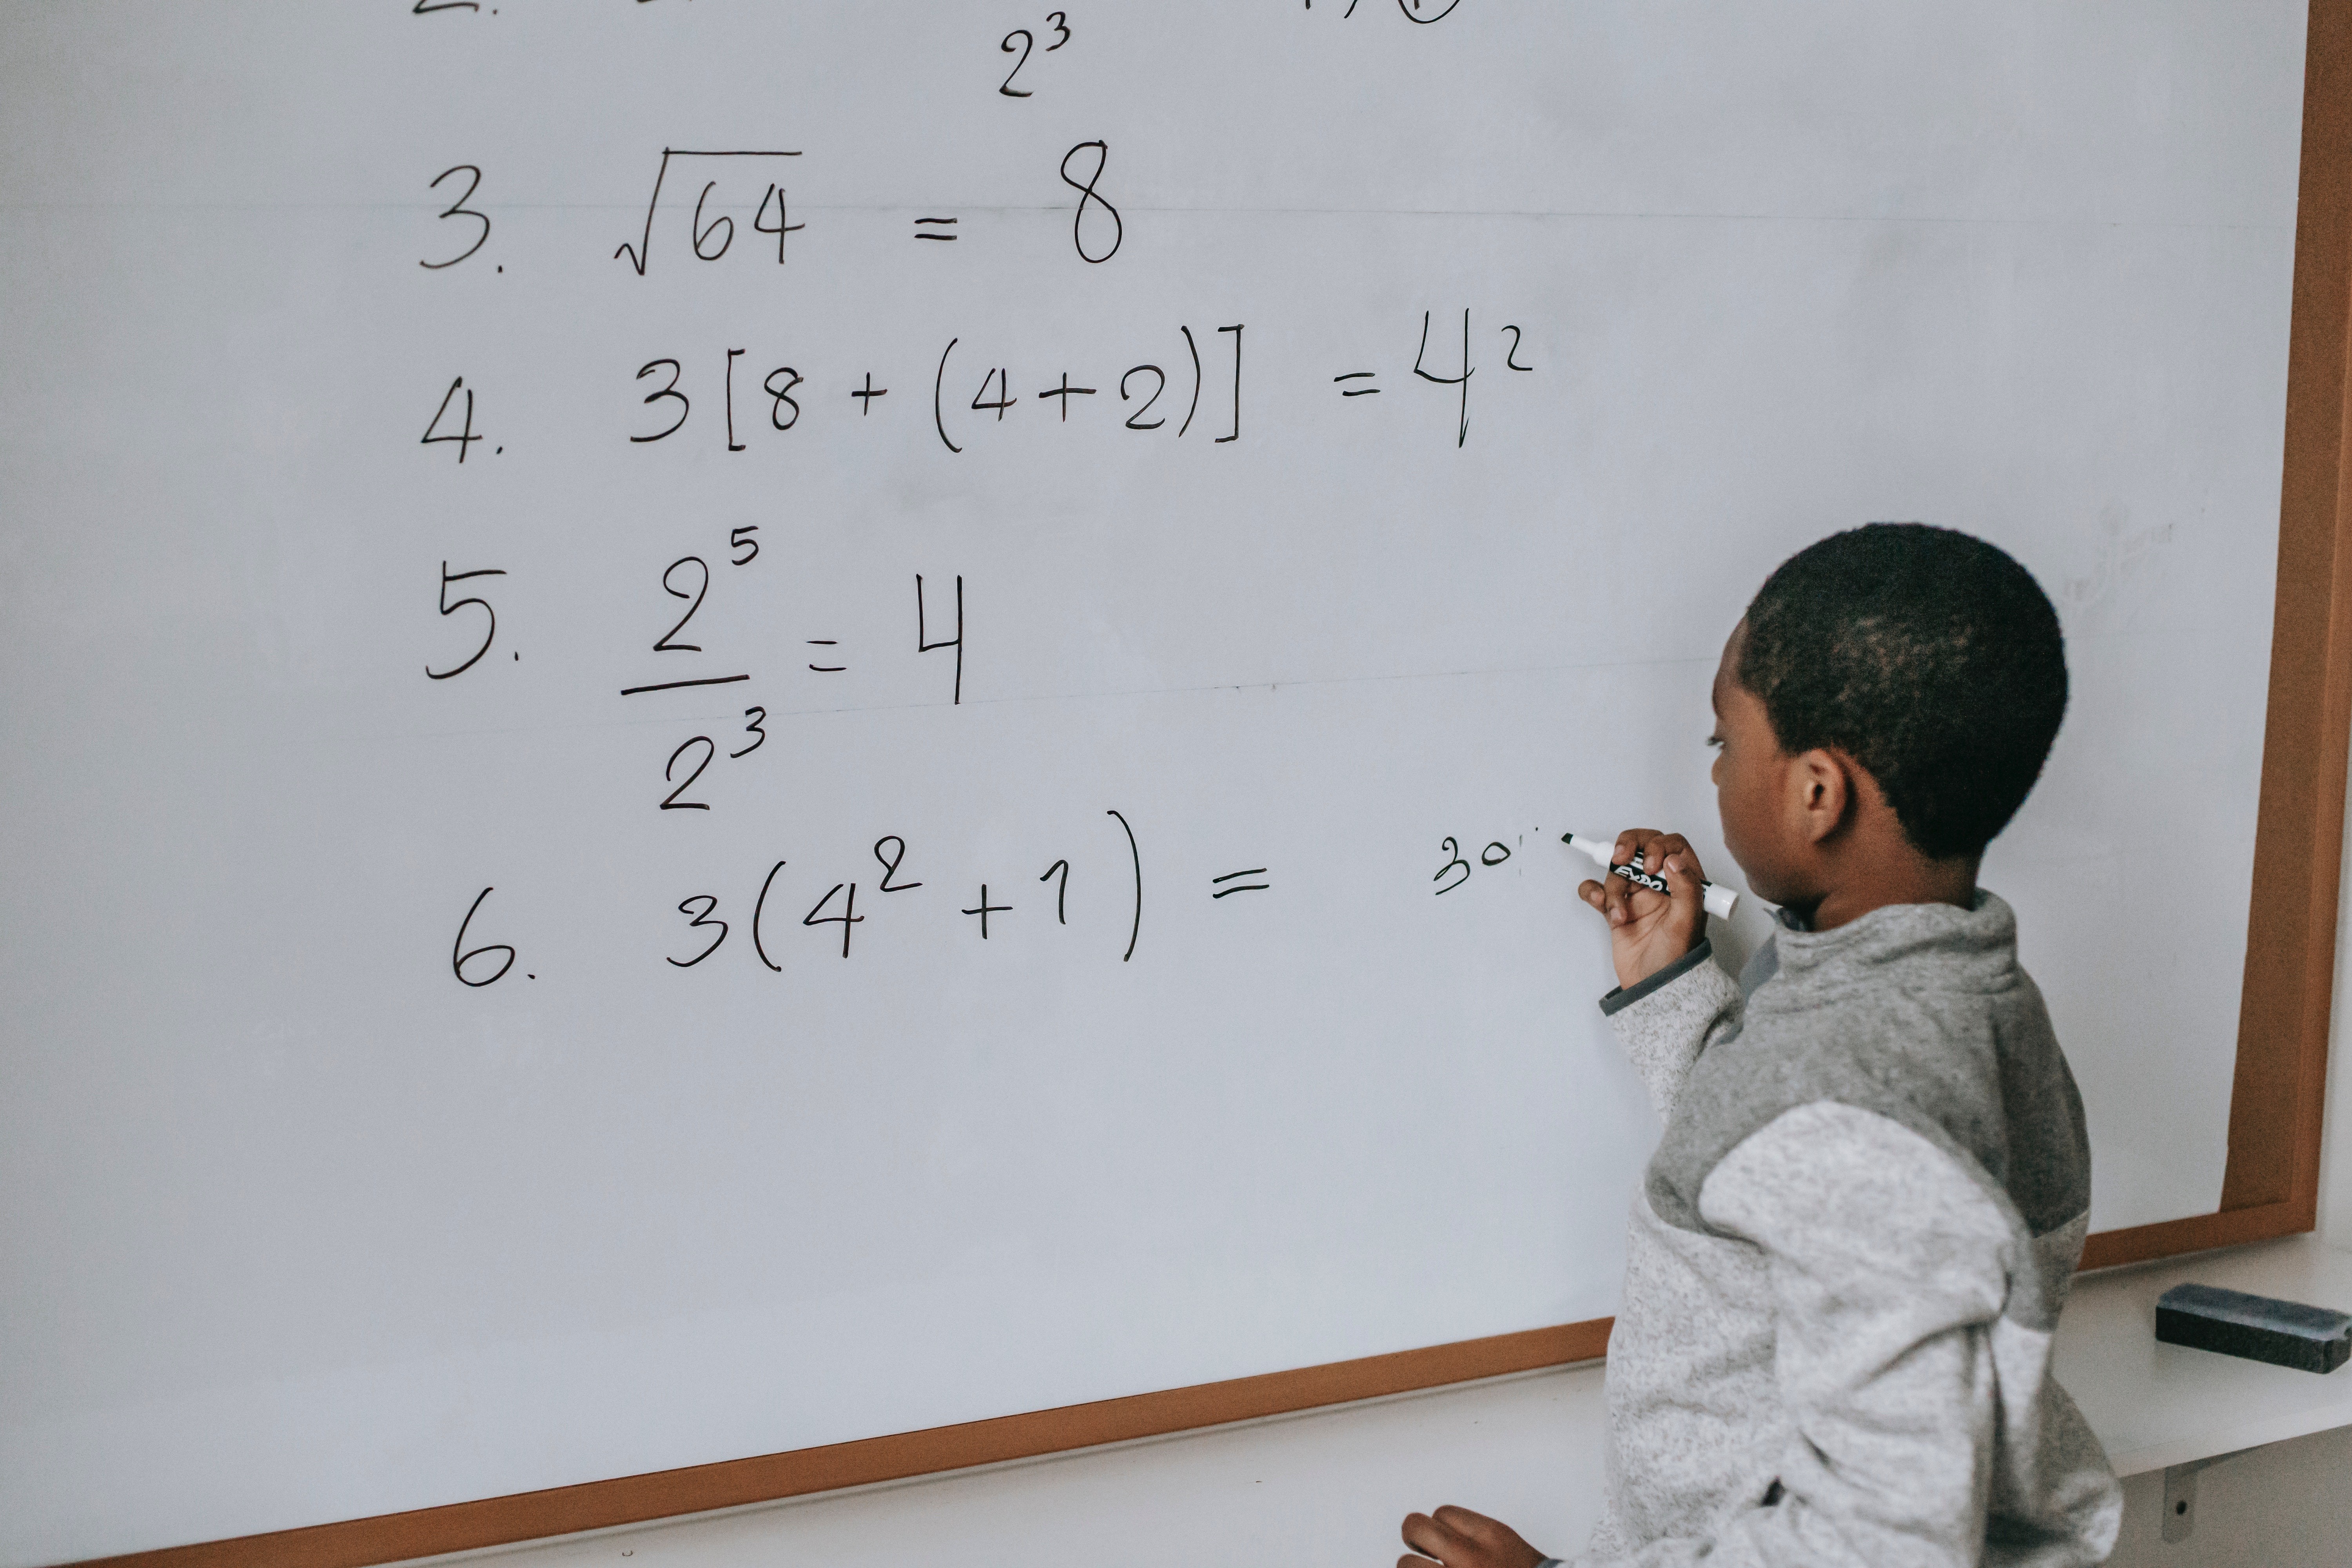 Young black student solving math equations on a dry erase board.